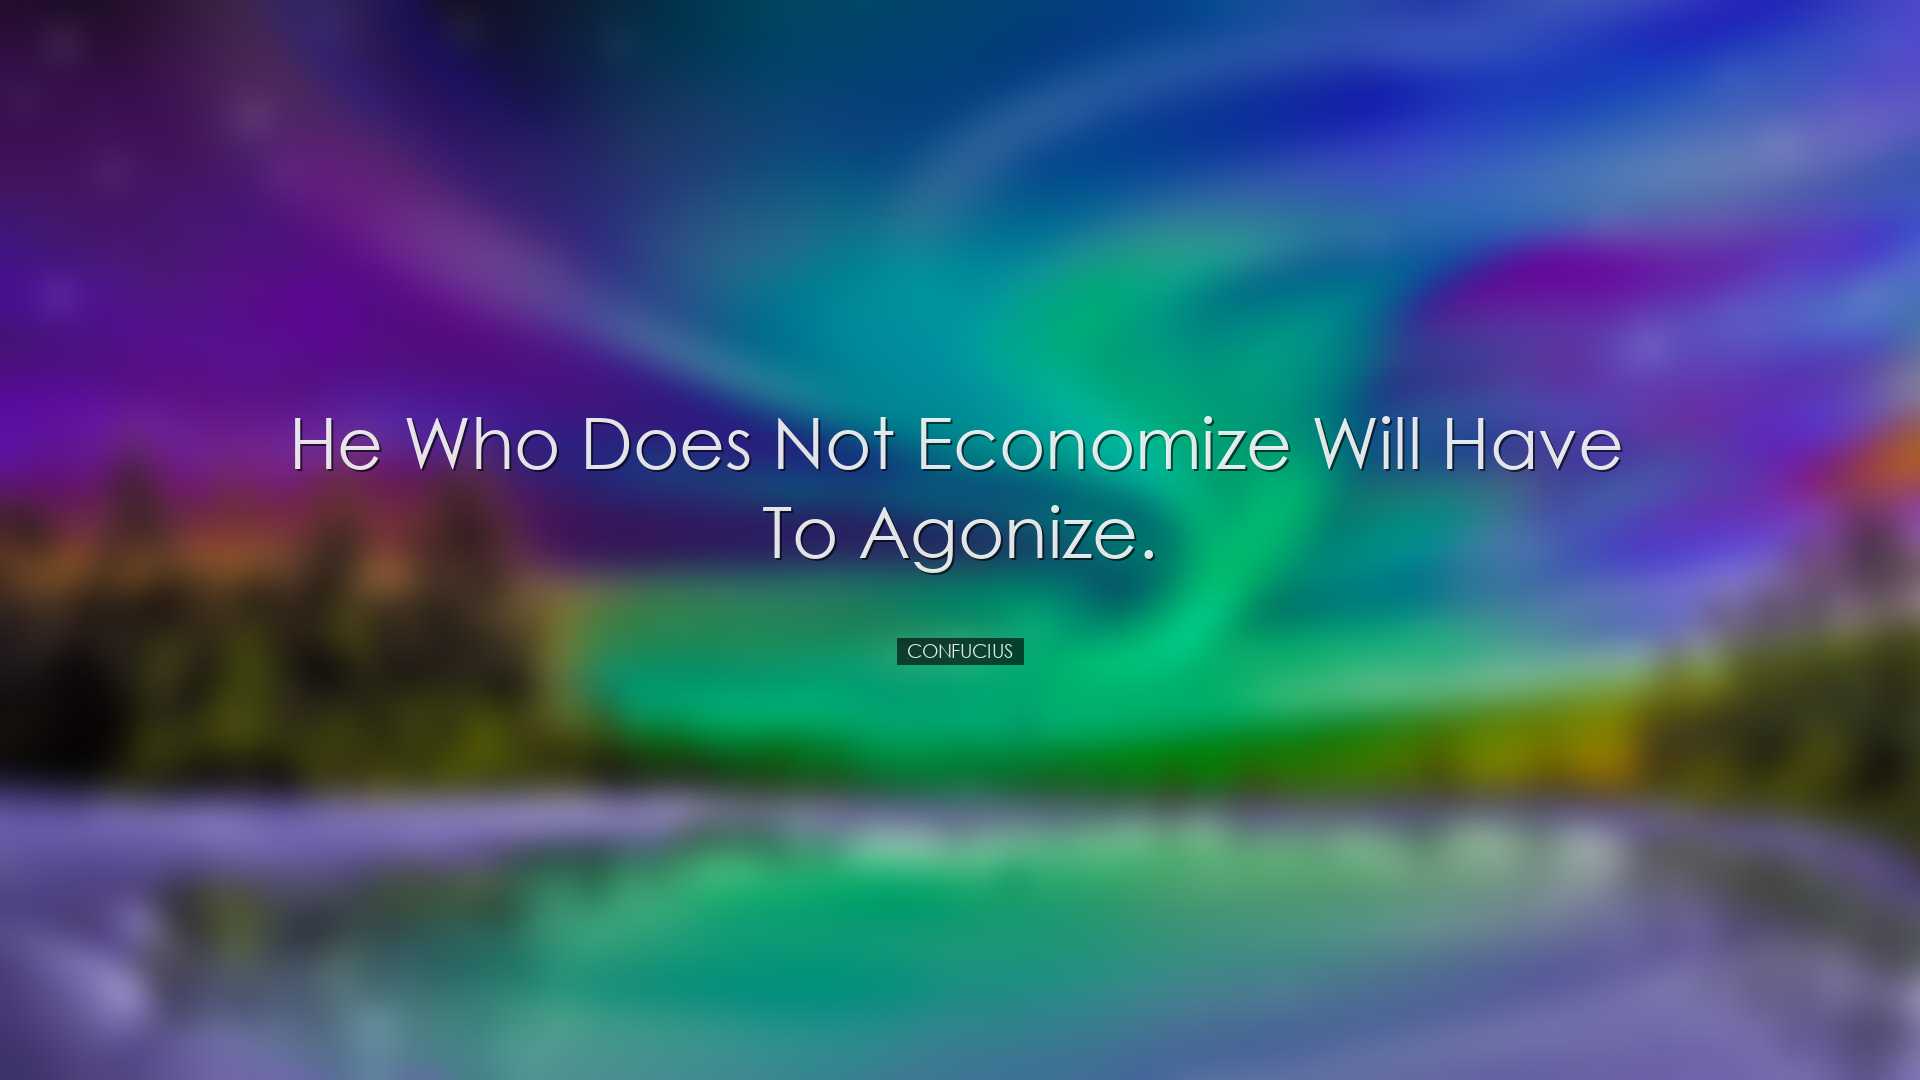 He who does not economize will have to agonize. - Confucius